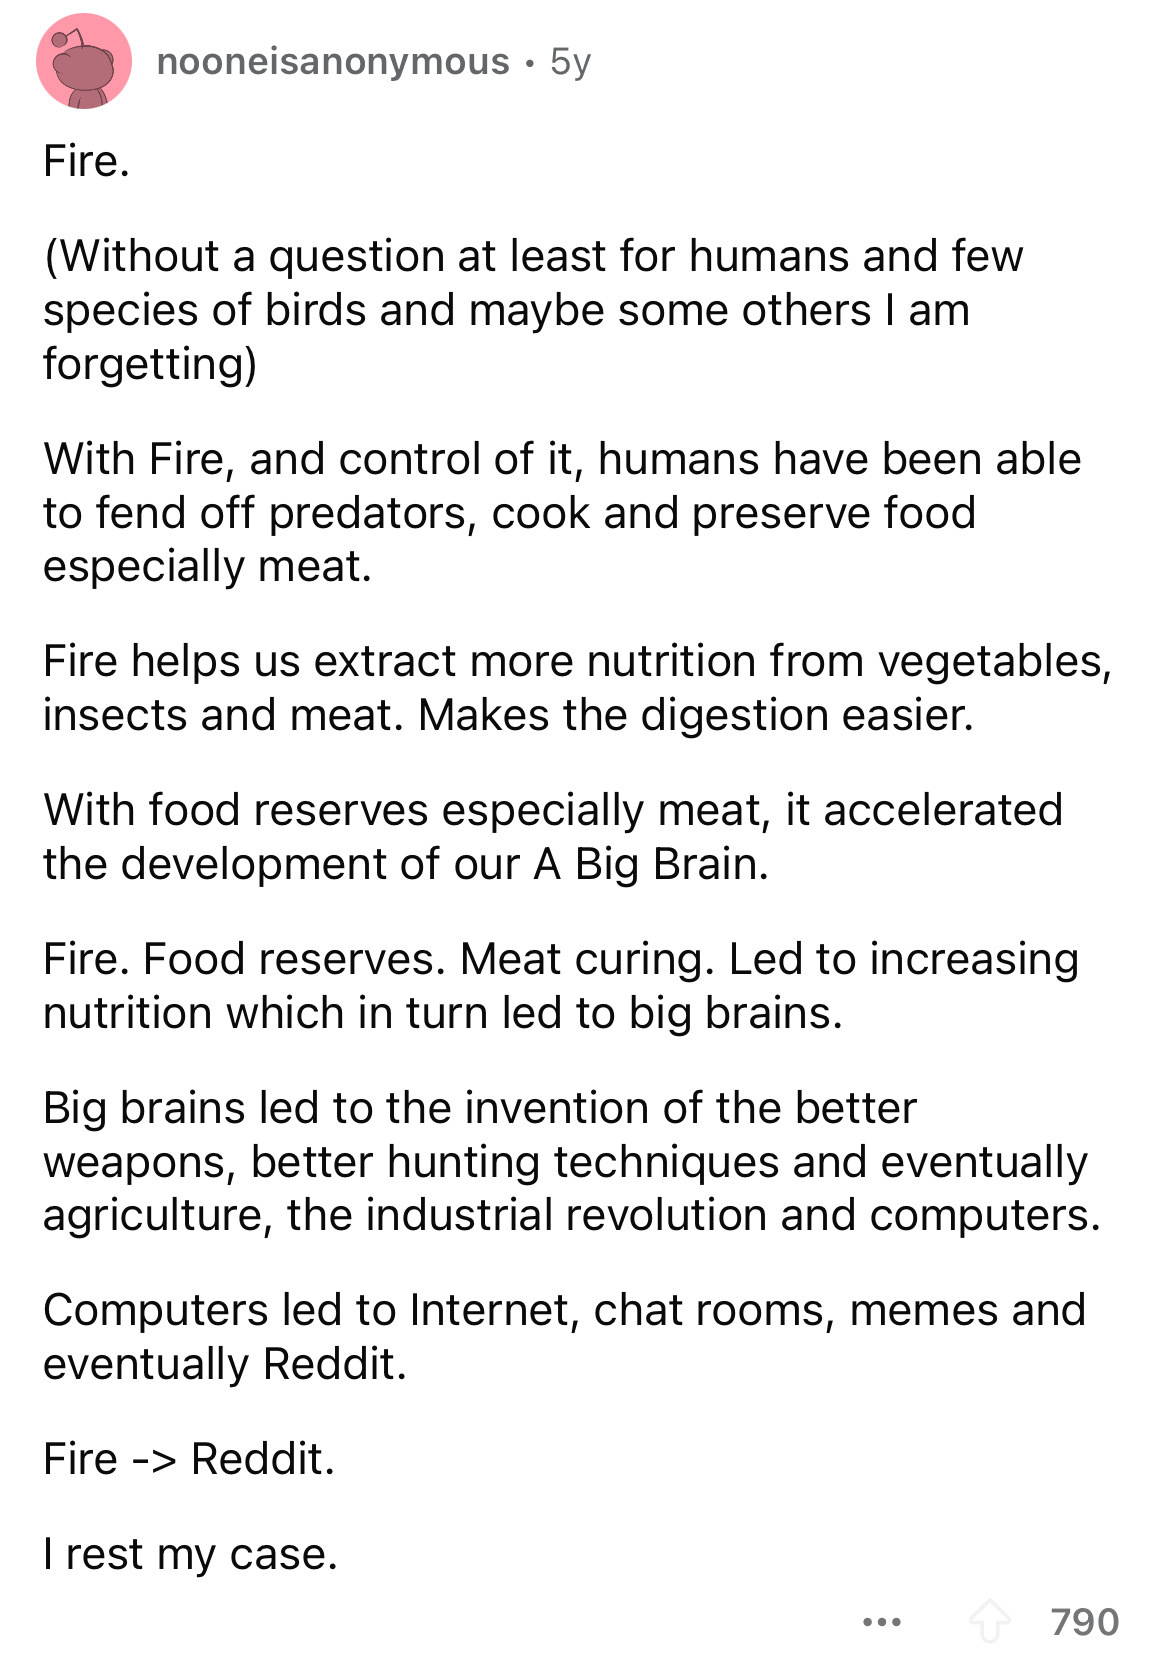 document - Fire. nooneisanonymous 5y Without a question at least for humans and few species of birds and maybe some others I am forgetting With Fire, and control of it, humans have been able to fend off predators, cook and preserve food especially meat. F